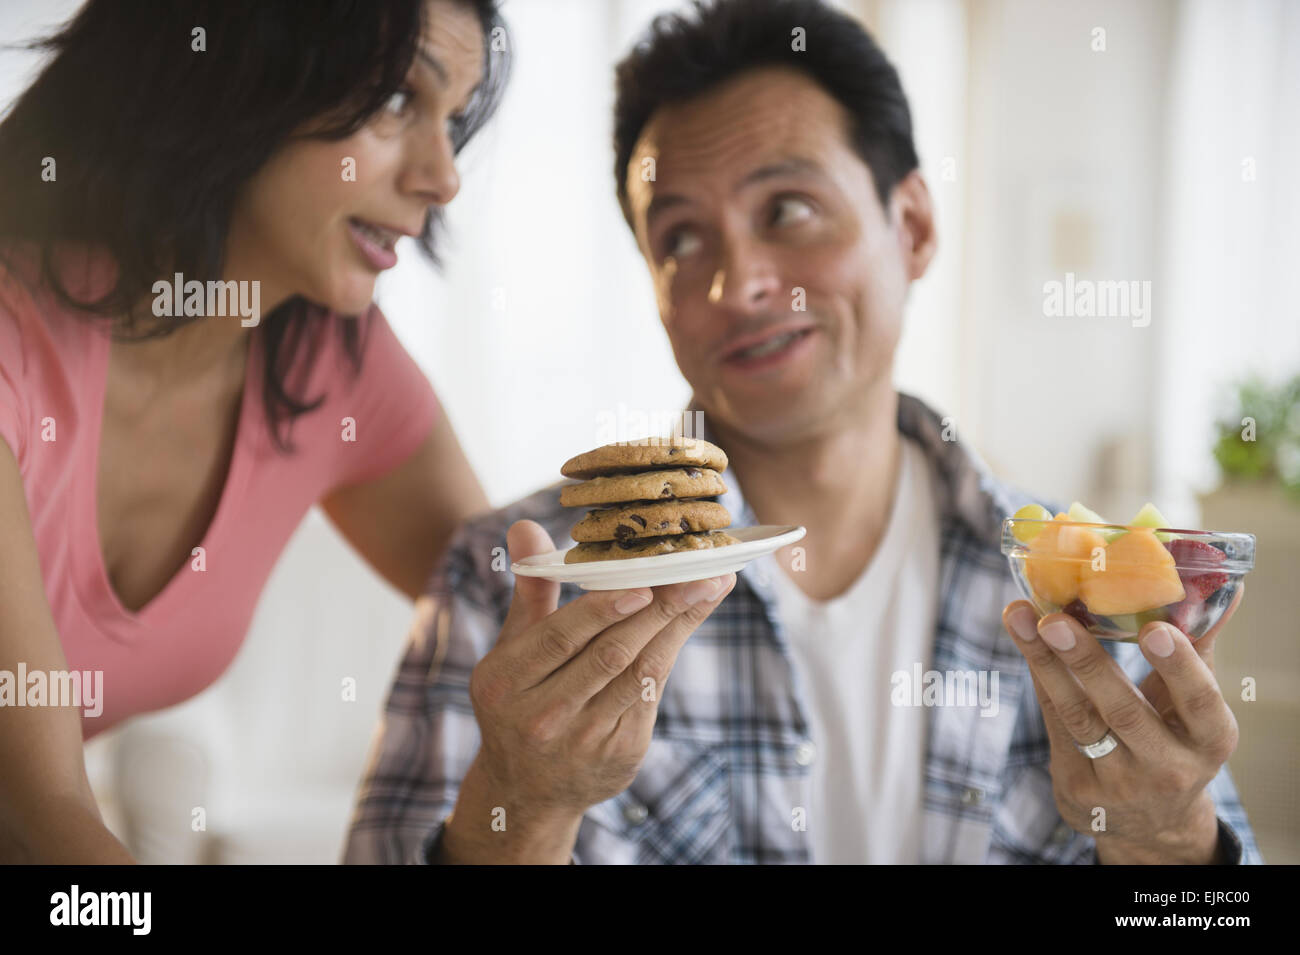 Couple choosing between healthy and unhealthy snacks Stock Photo